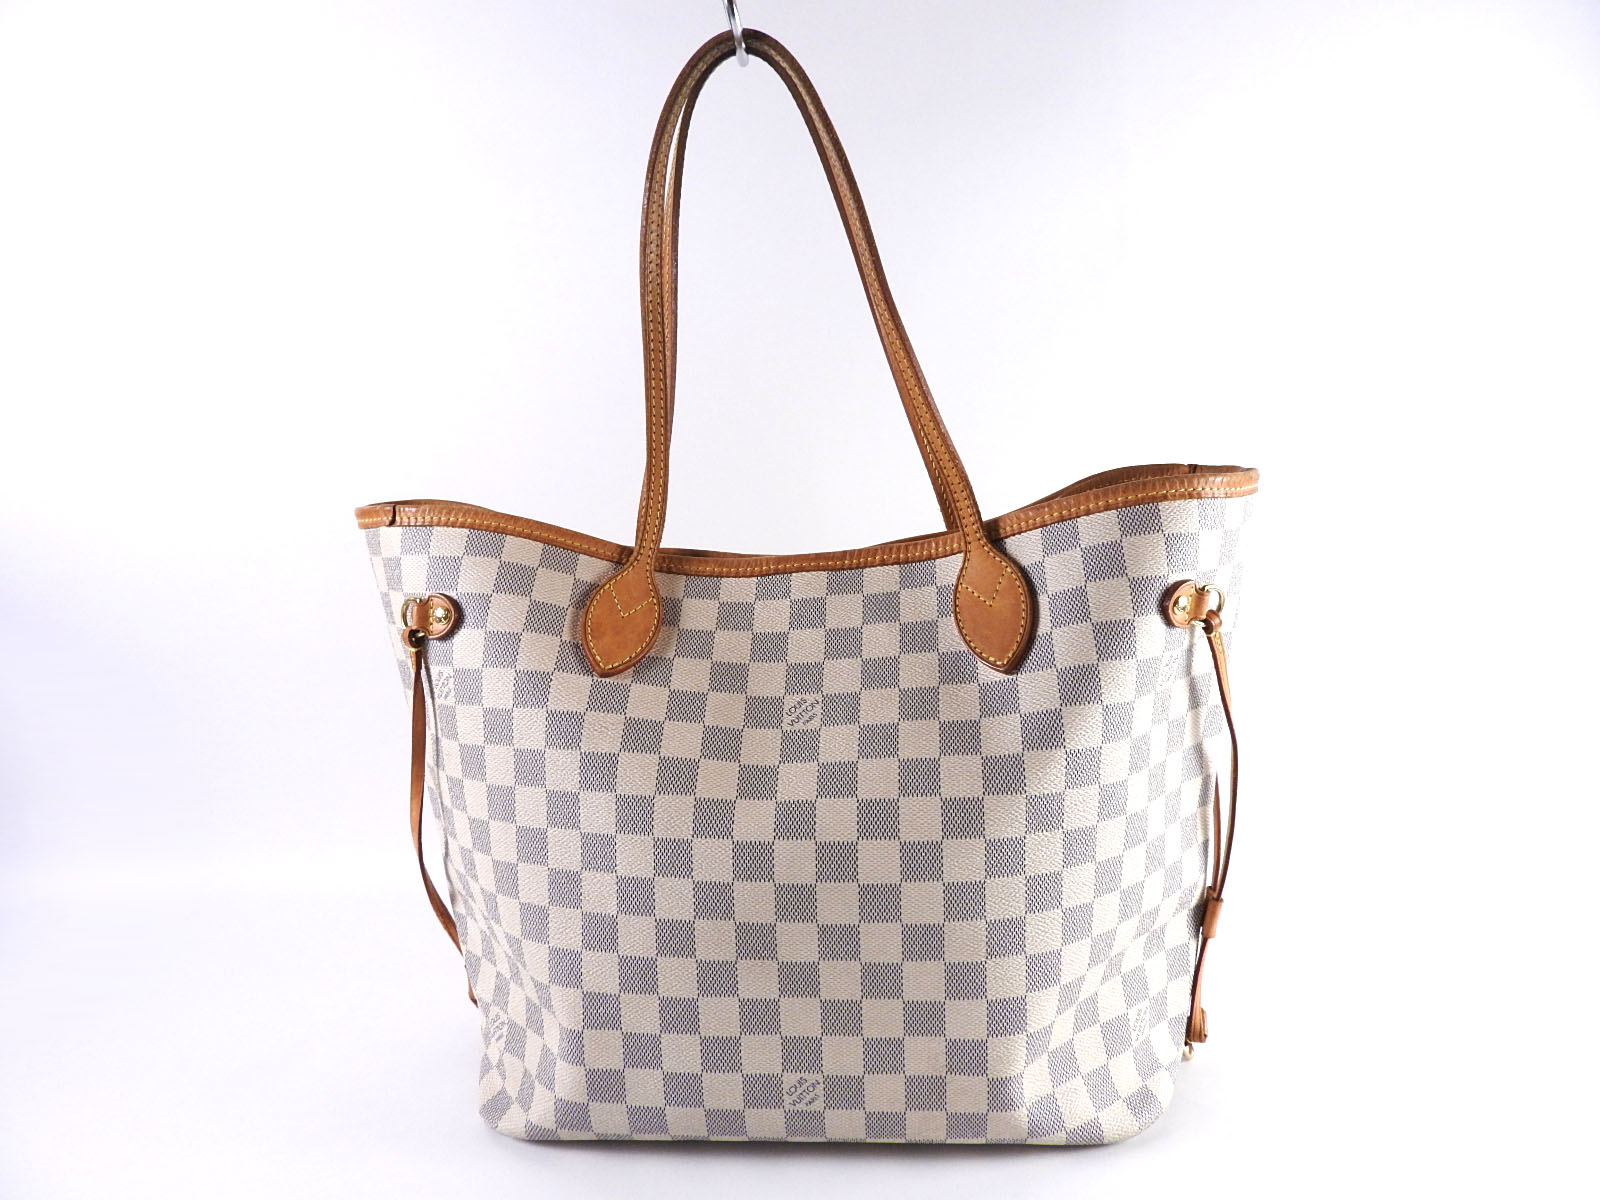 Louis Vuitton Neverfull Mm Strap Drop | Confederated Tribes of the Umatilla Indian Reservation